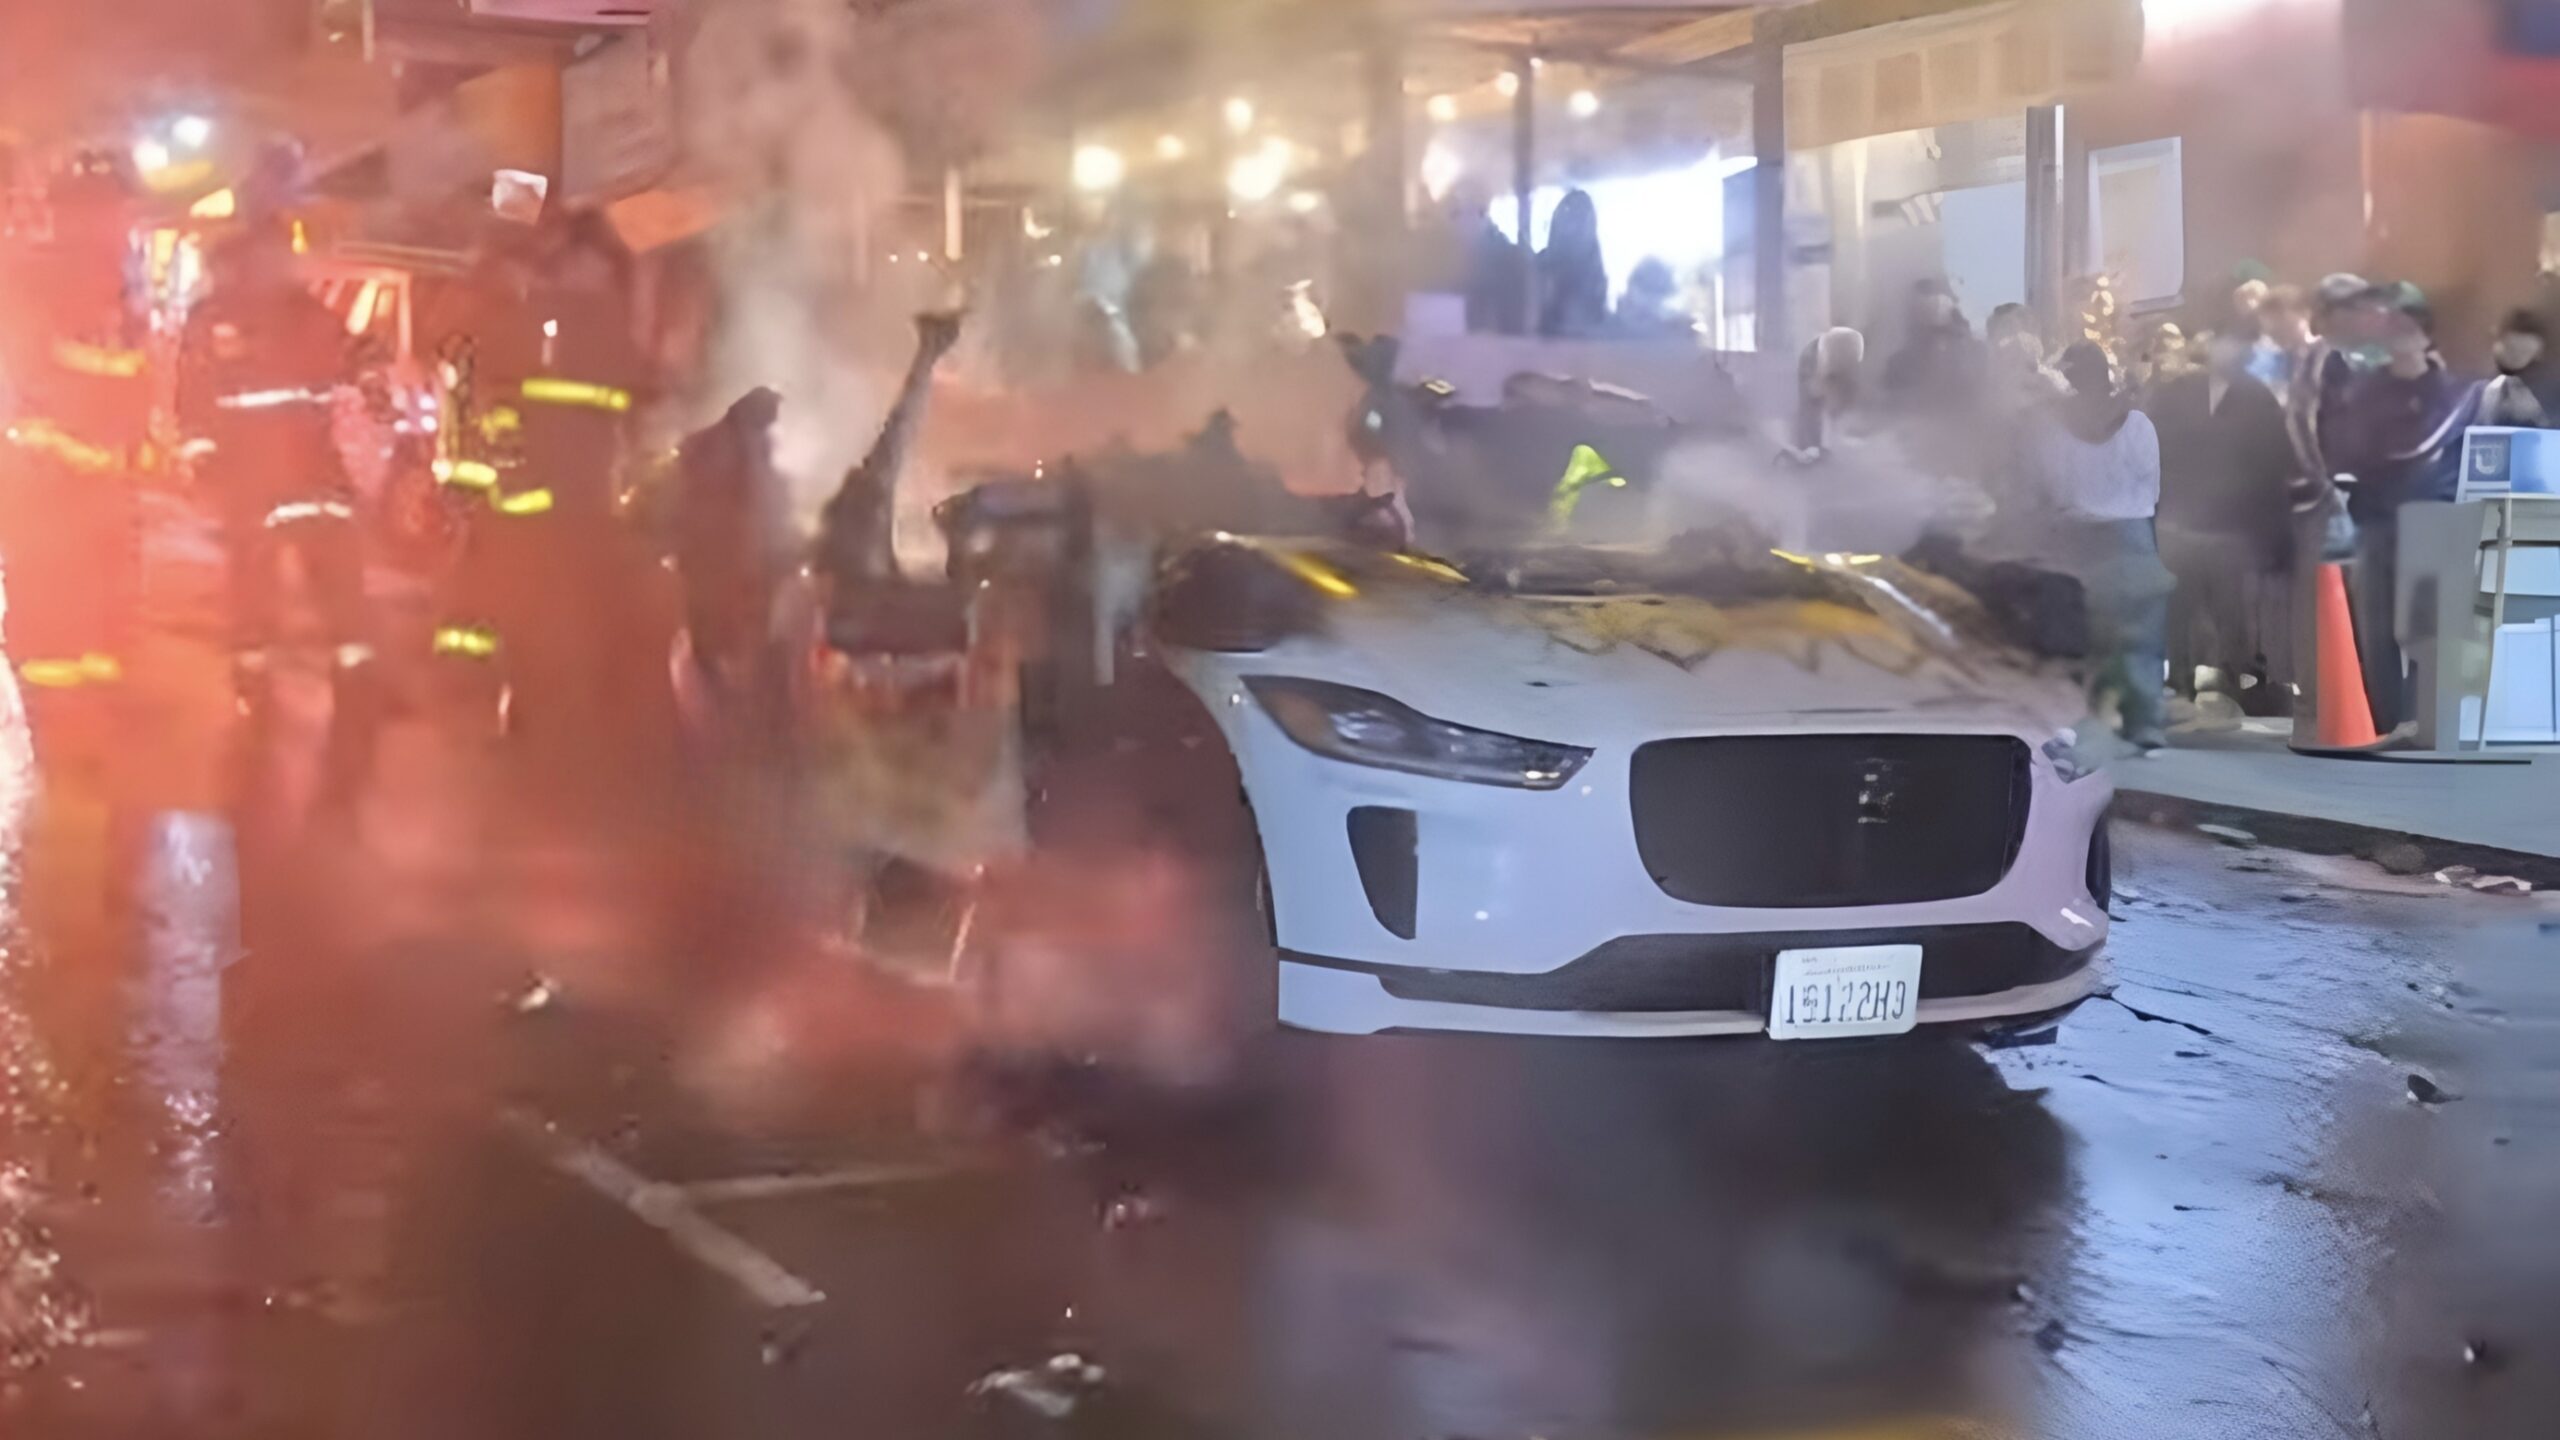 They destroyed the autonomous taxi and set it on fire!